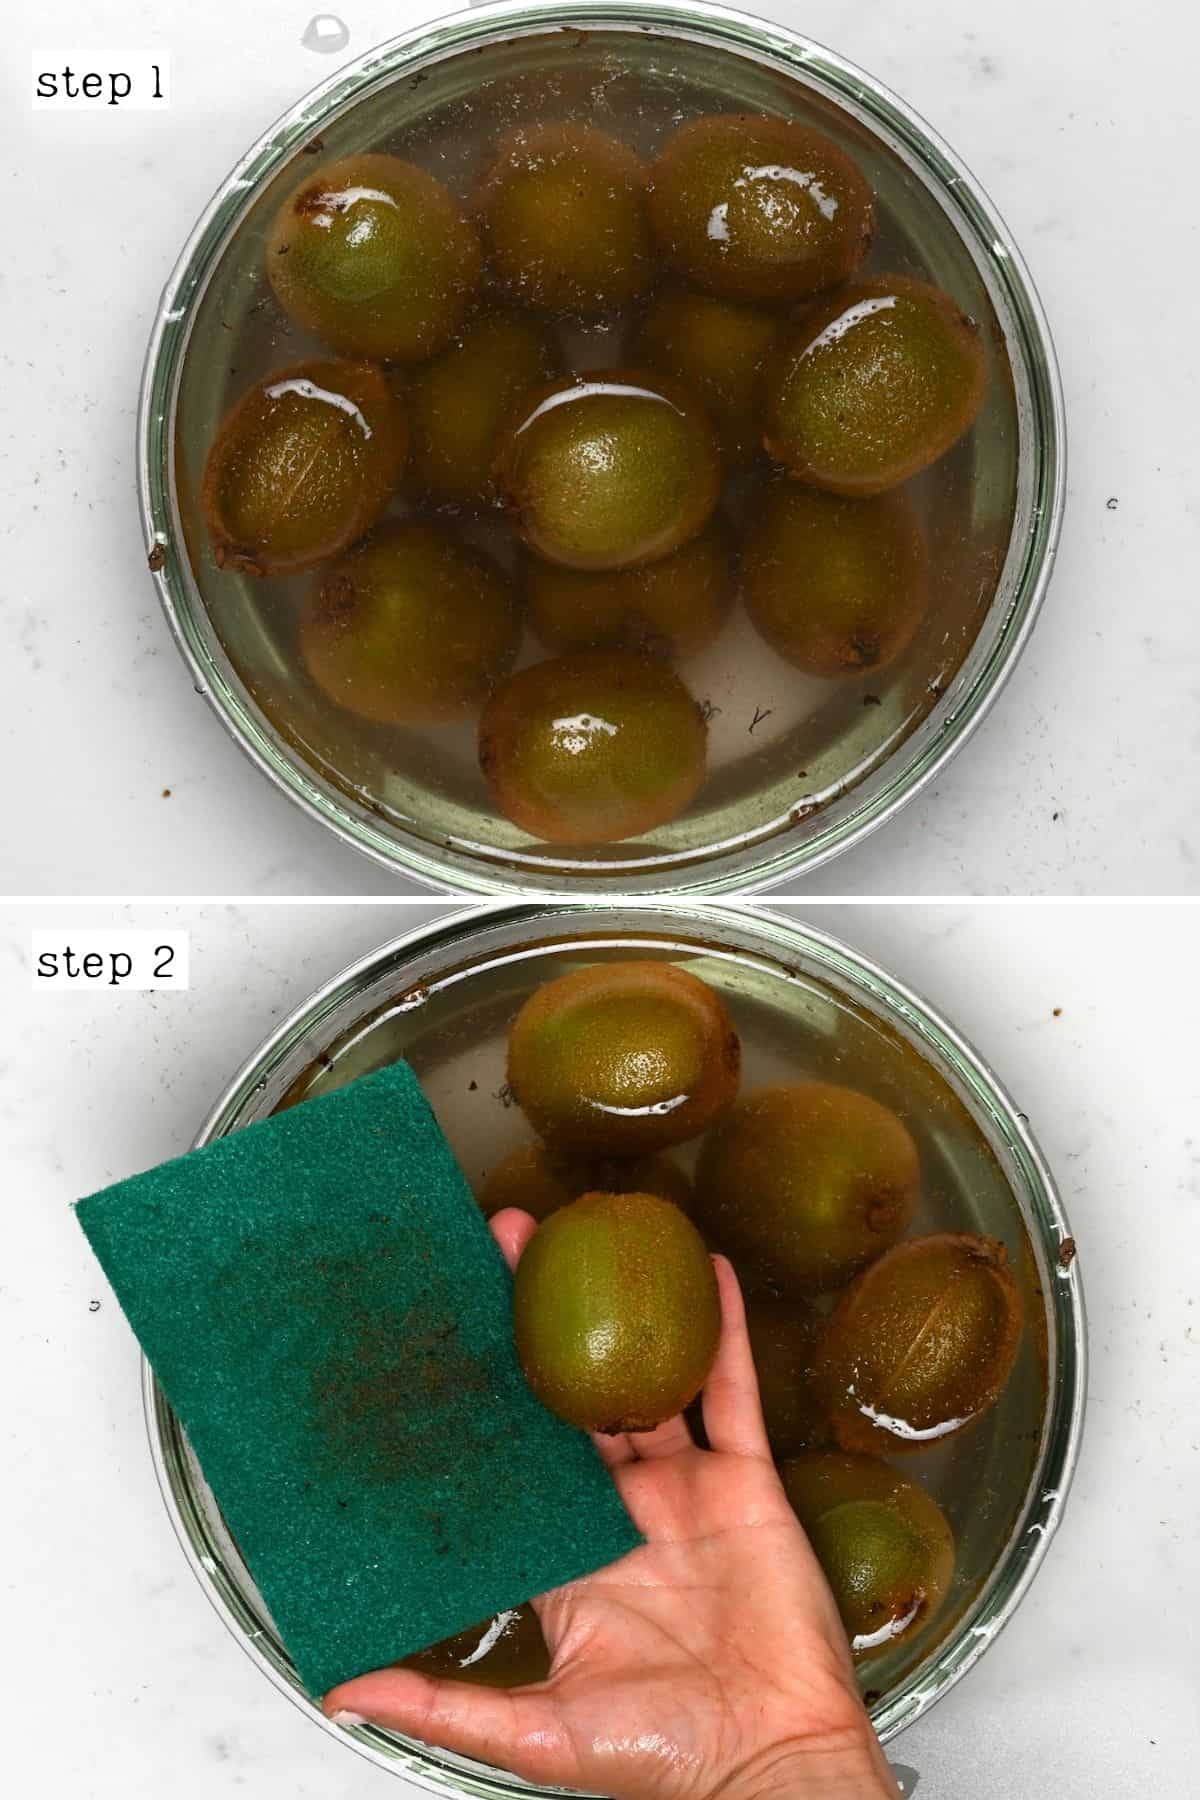 Steps for cleaning kiwis